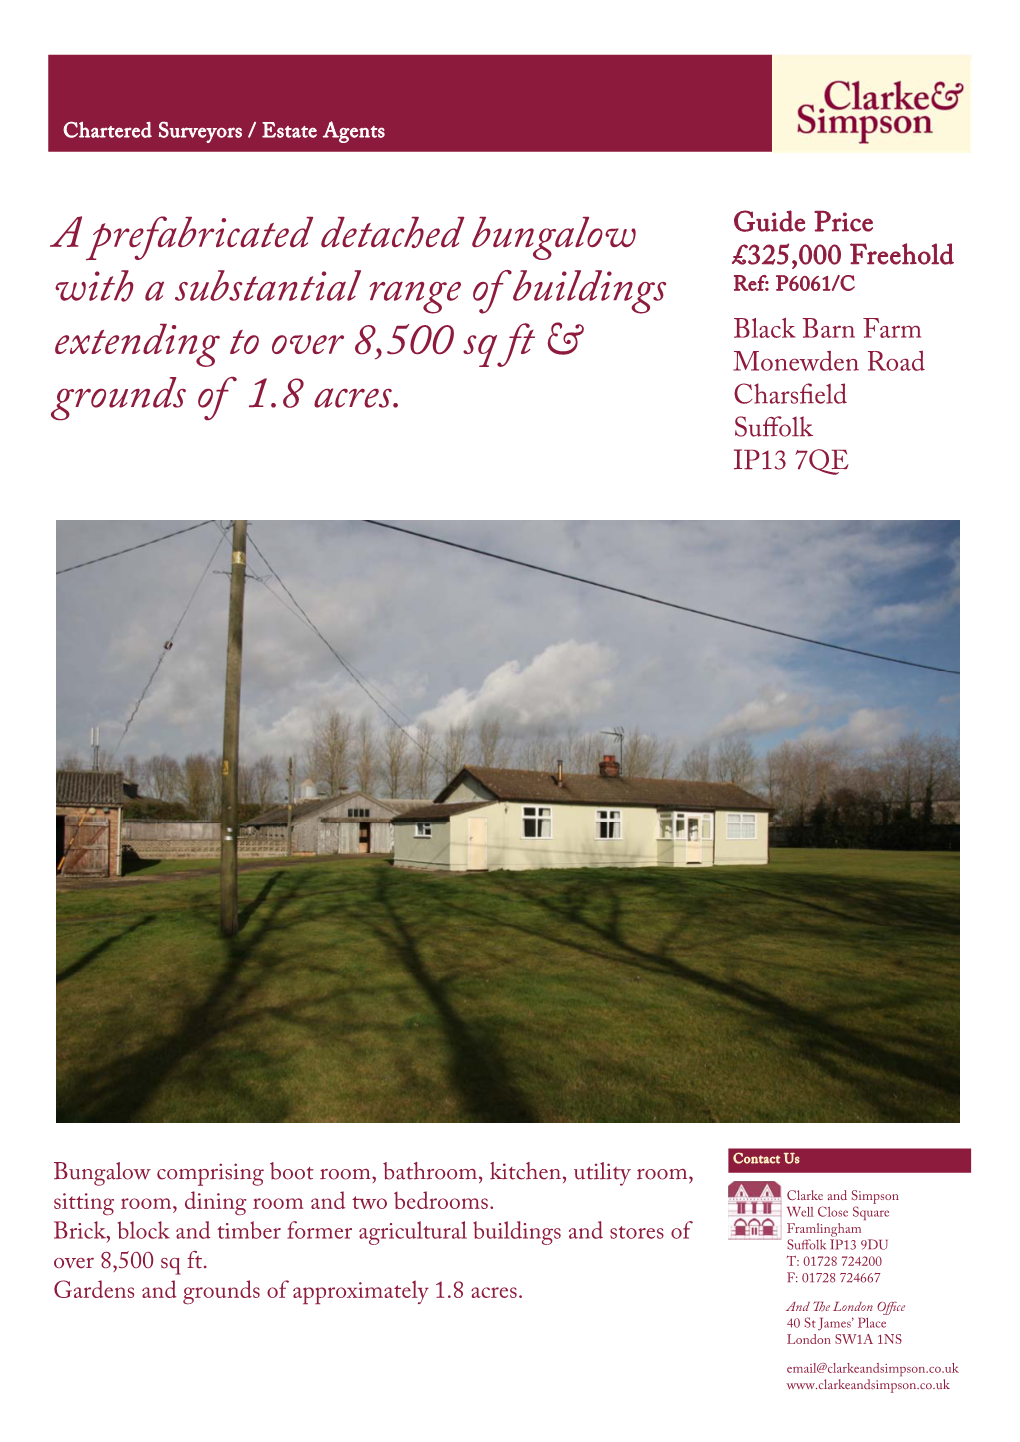 A Prefabricated Detached Bungalow with a Substantial Range of Buildings